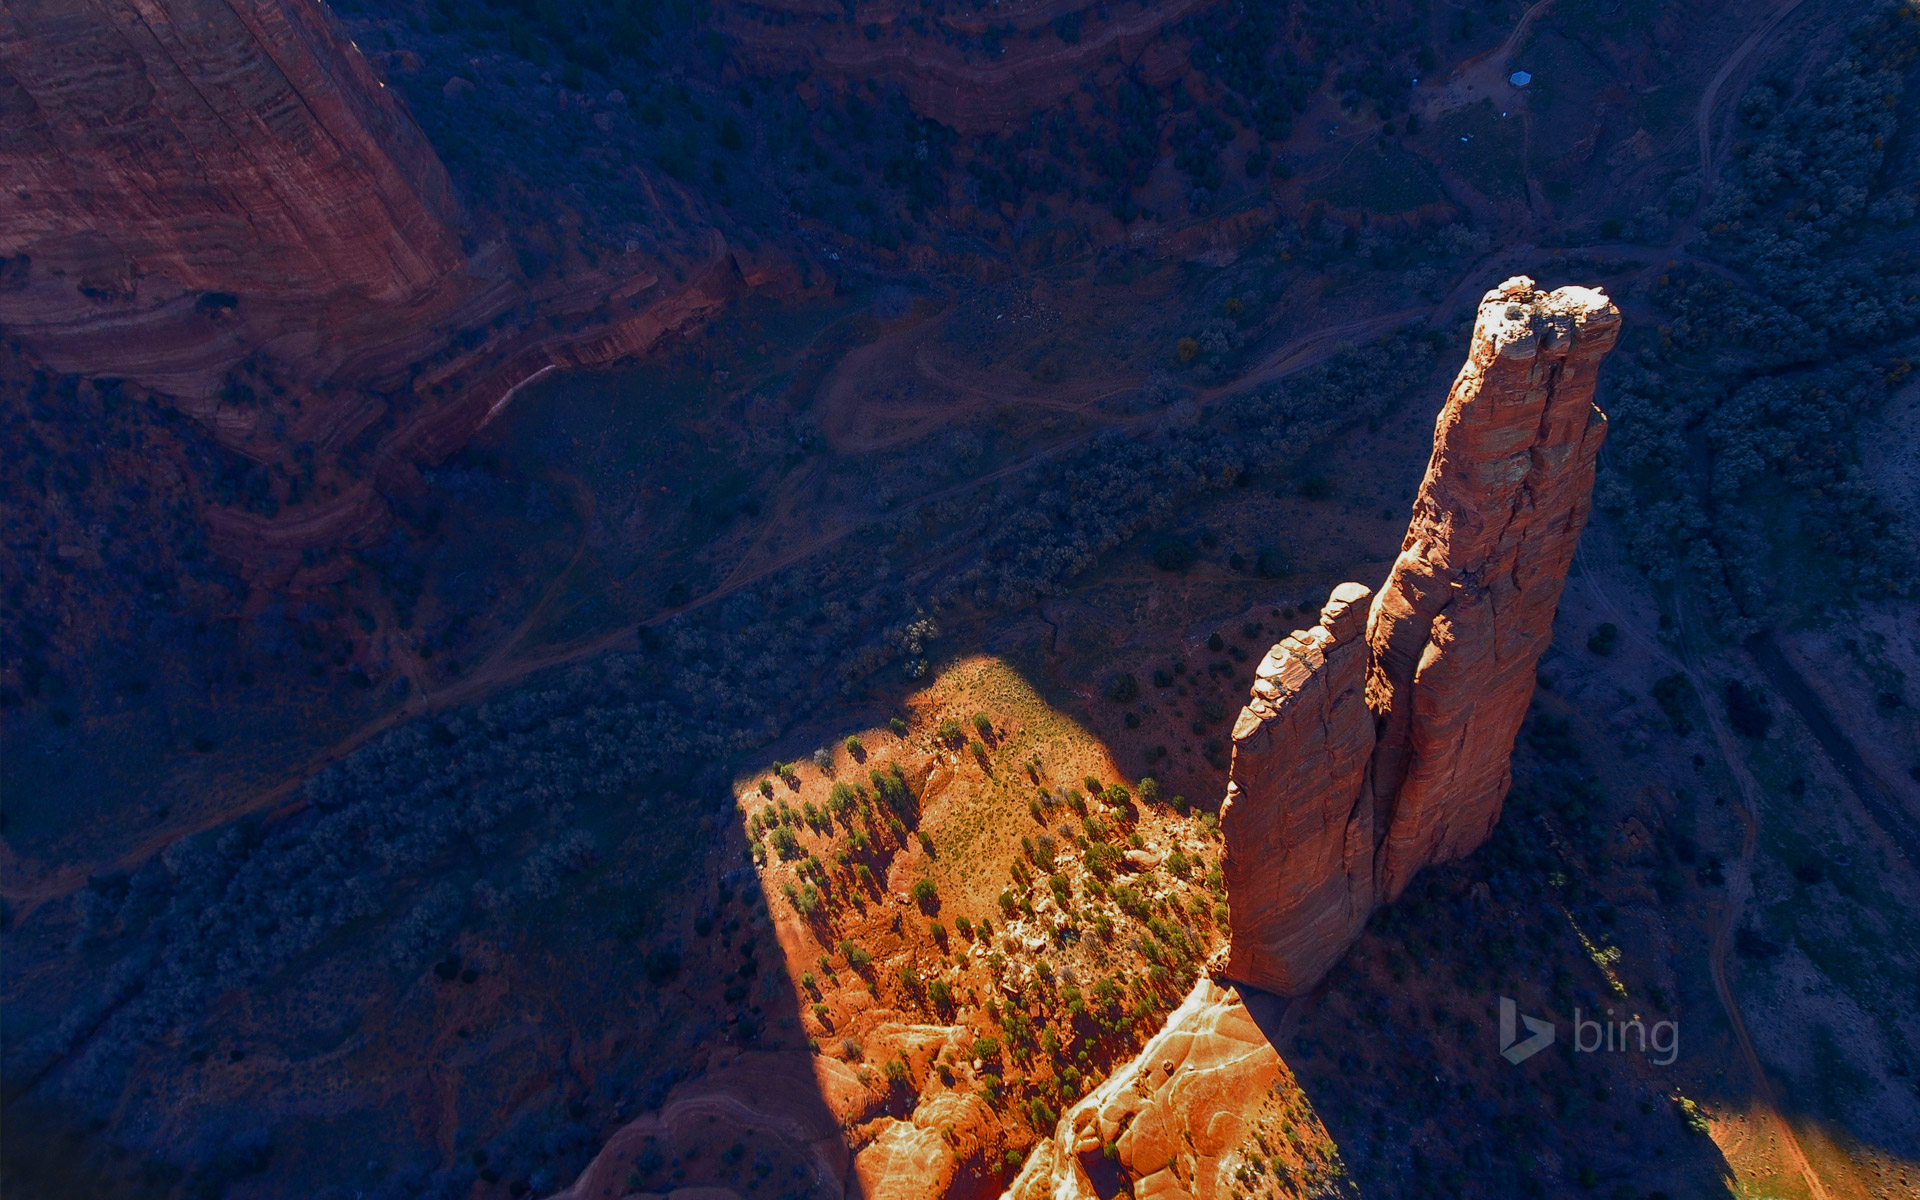 Spider Rock in Canyon de Chelly National Monument, Arizona